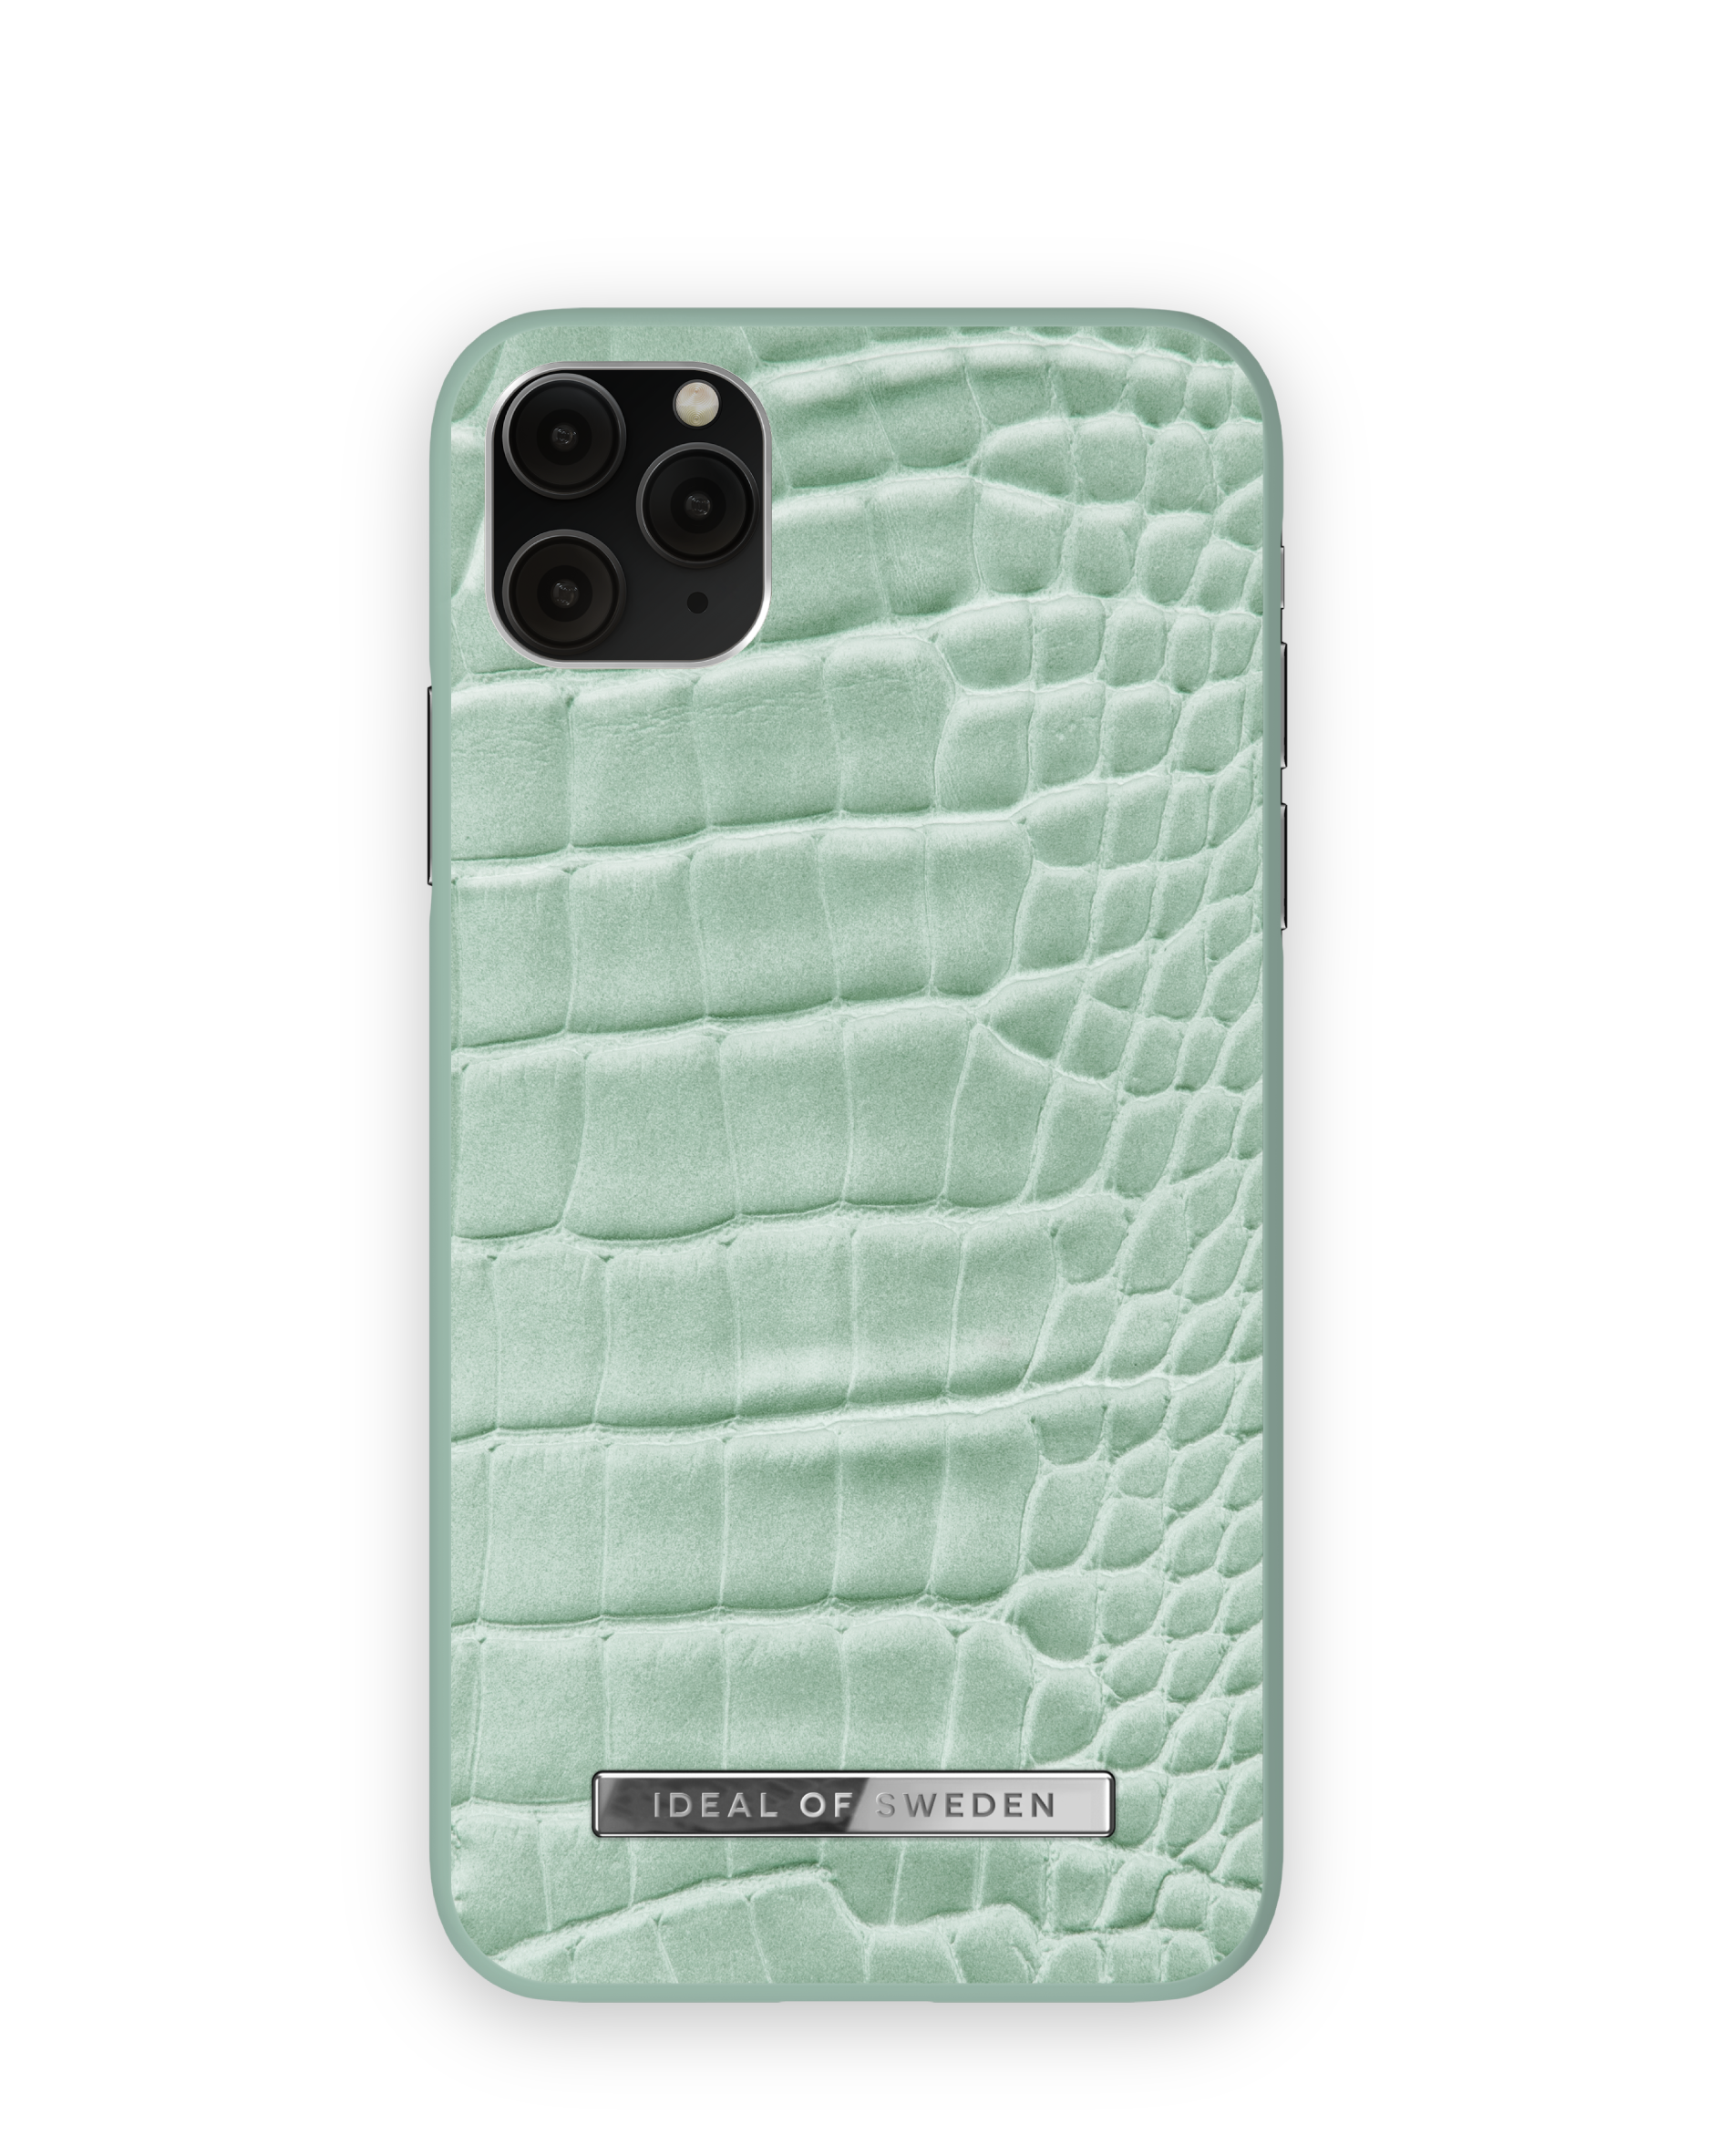 IDEAL OF SWEDEN IDPWSS21-I1965-261, Bookcover, 11 XS iPhone Apple Pro iPhone Apple Apple, Max, Mint Croco Max